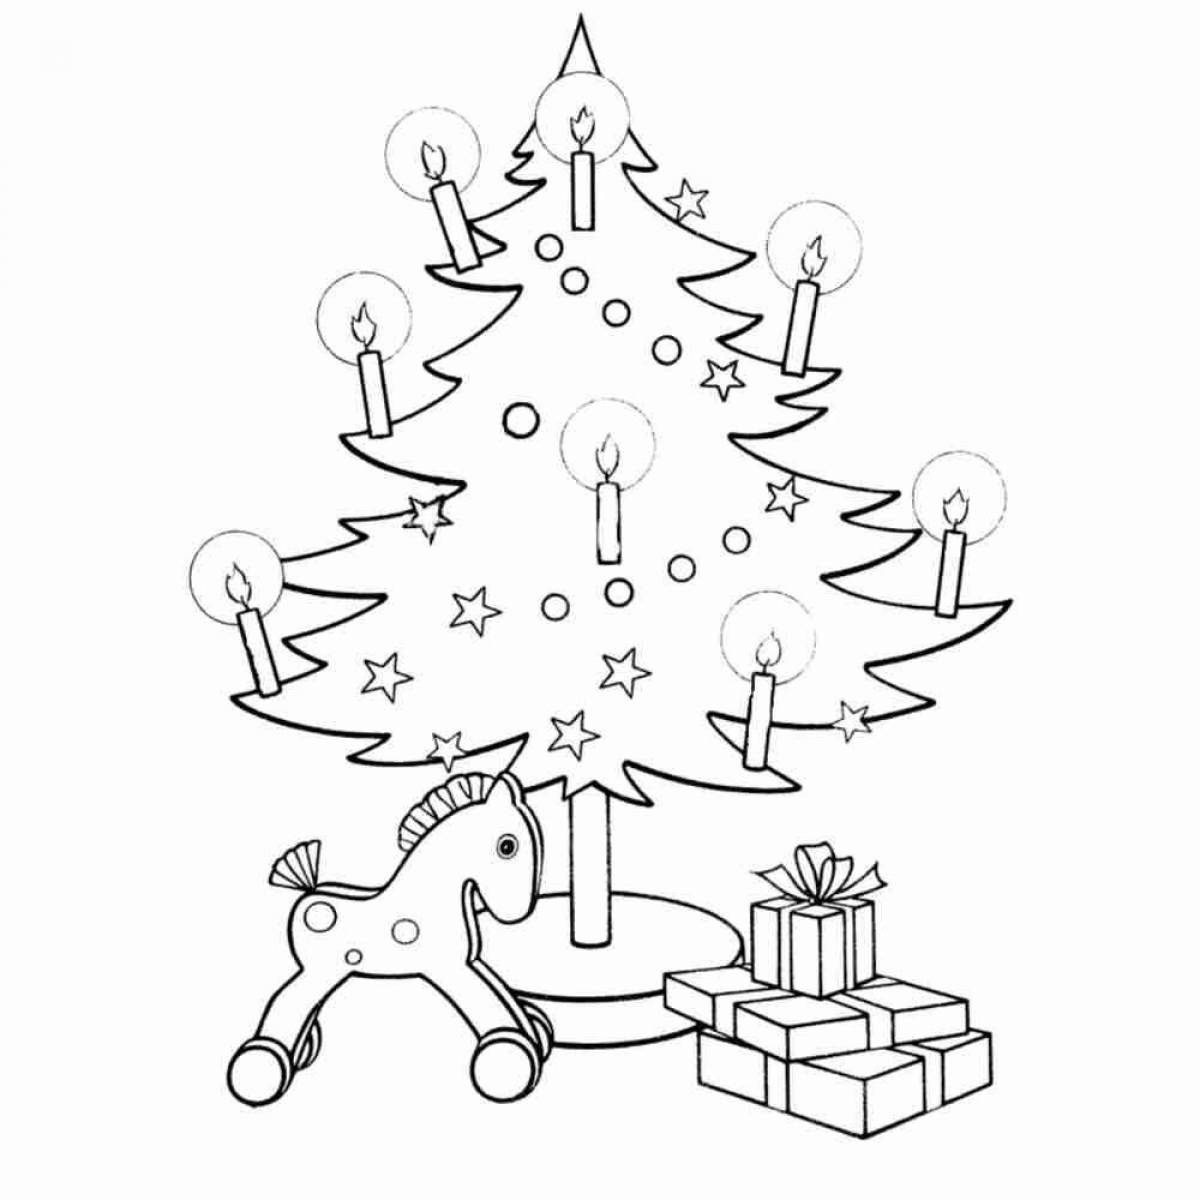 Exquisite Christmas tree coloring book